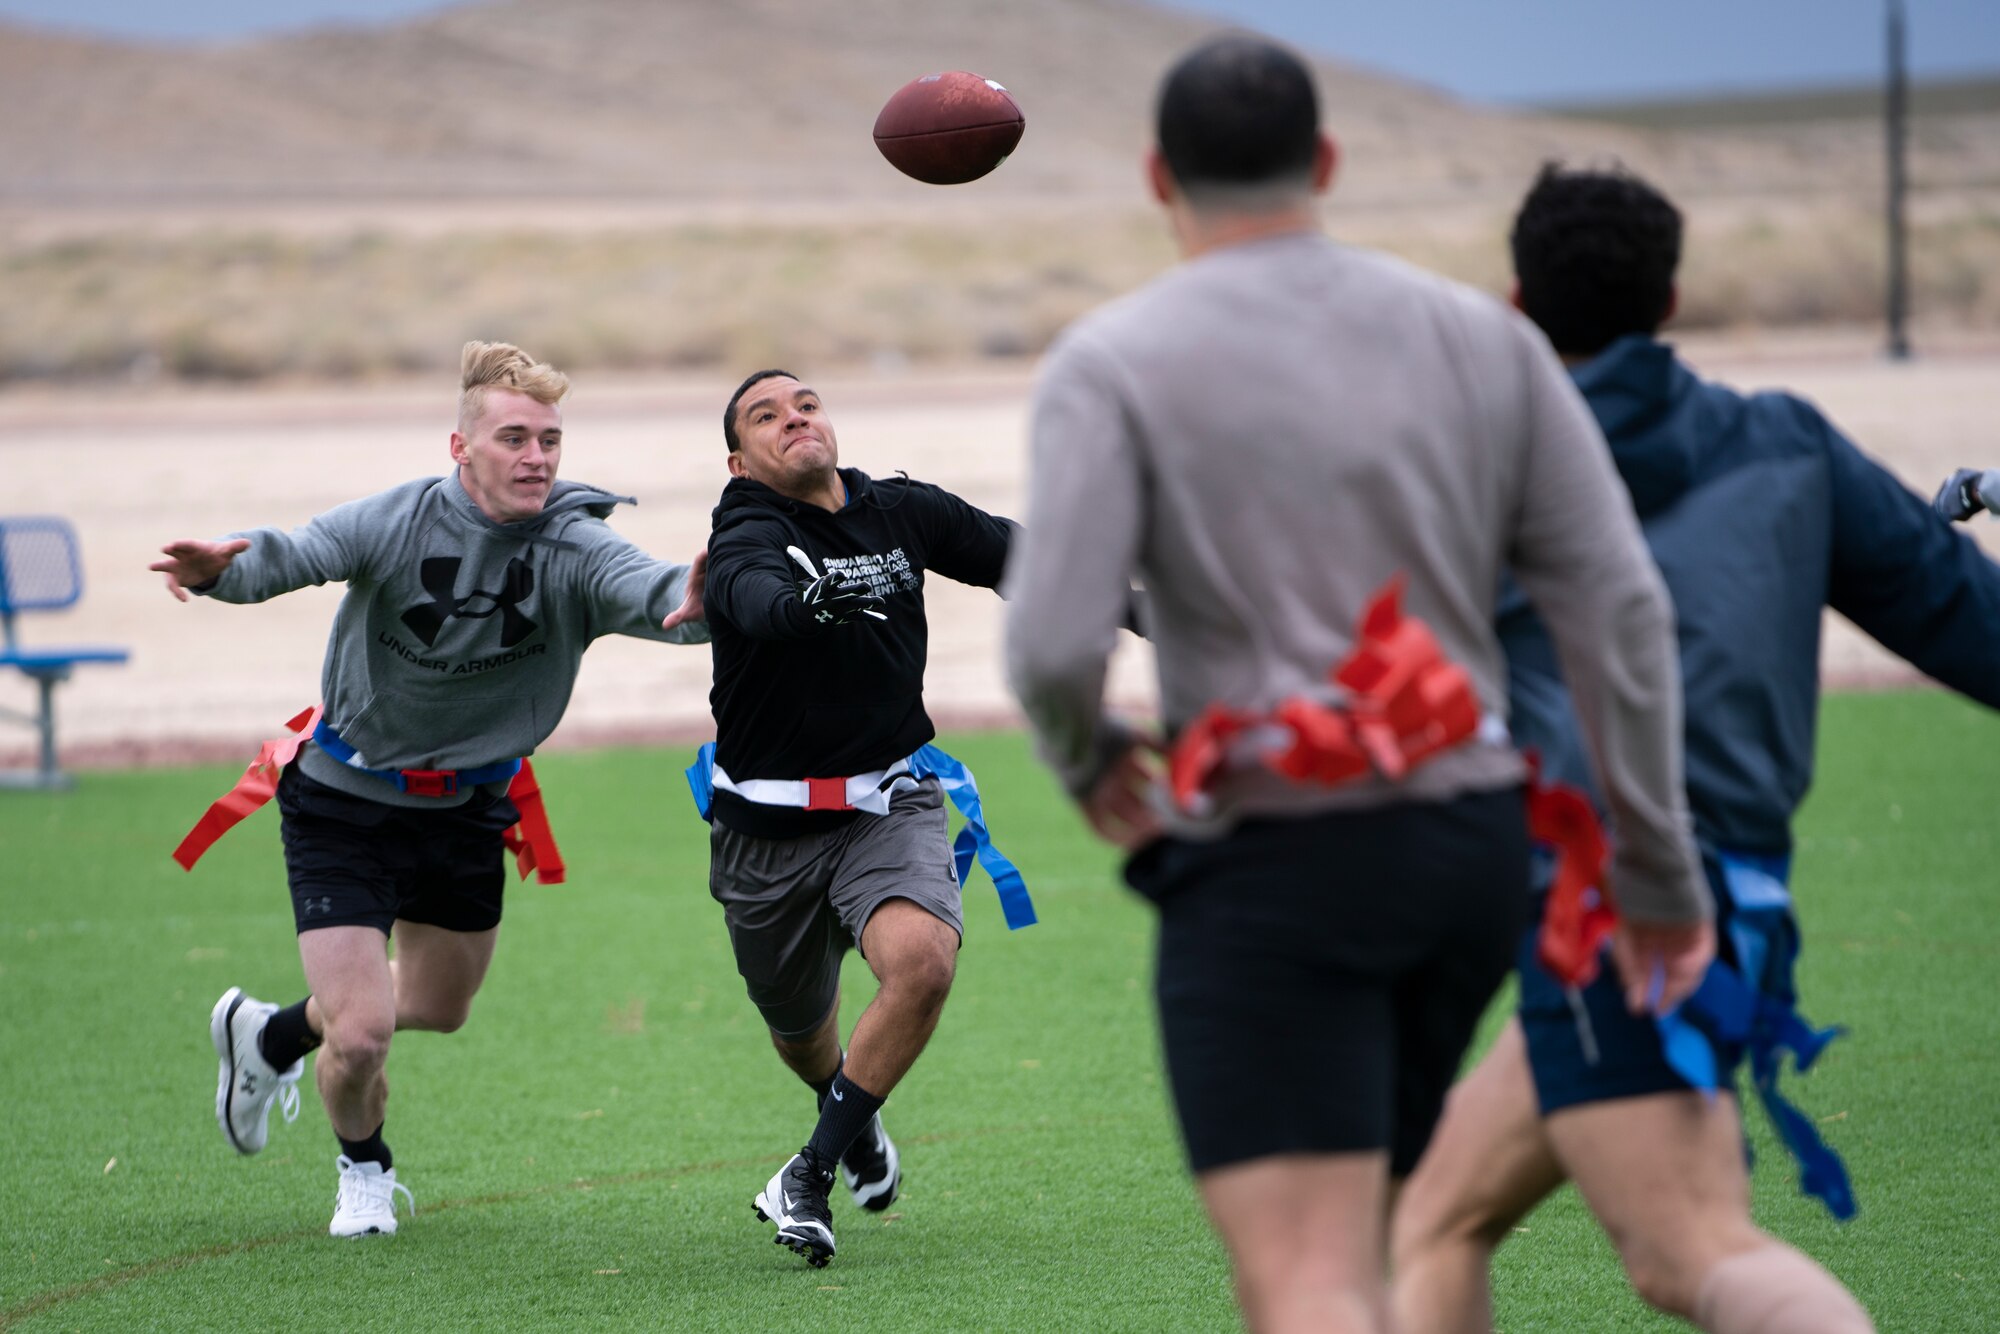 An airman catches a football while being defended by other Airmen on a turf field during a flag football game.